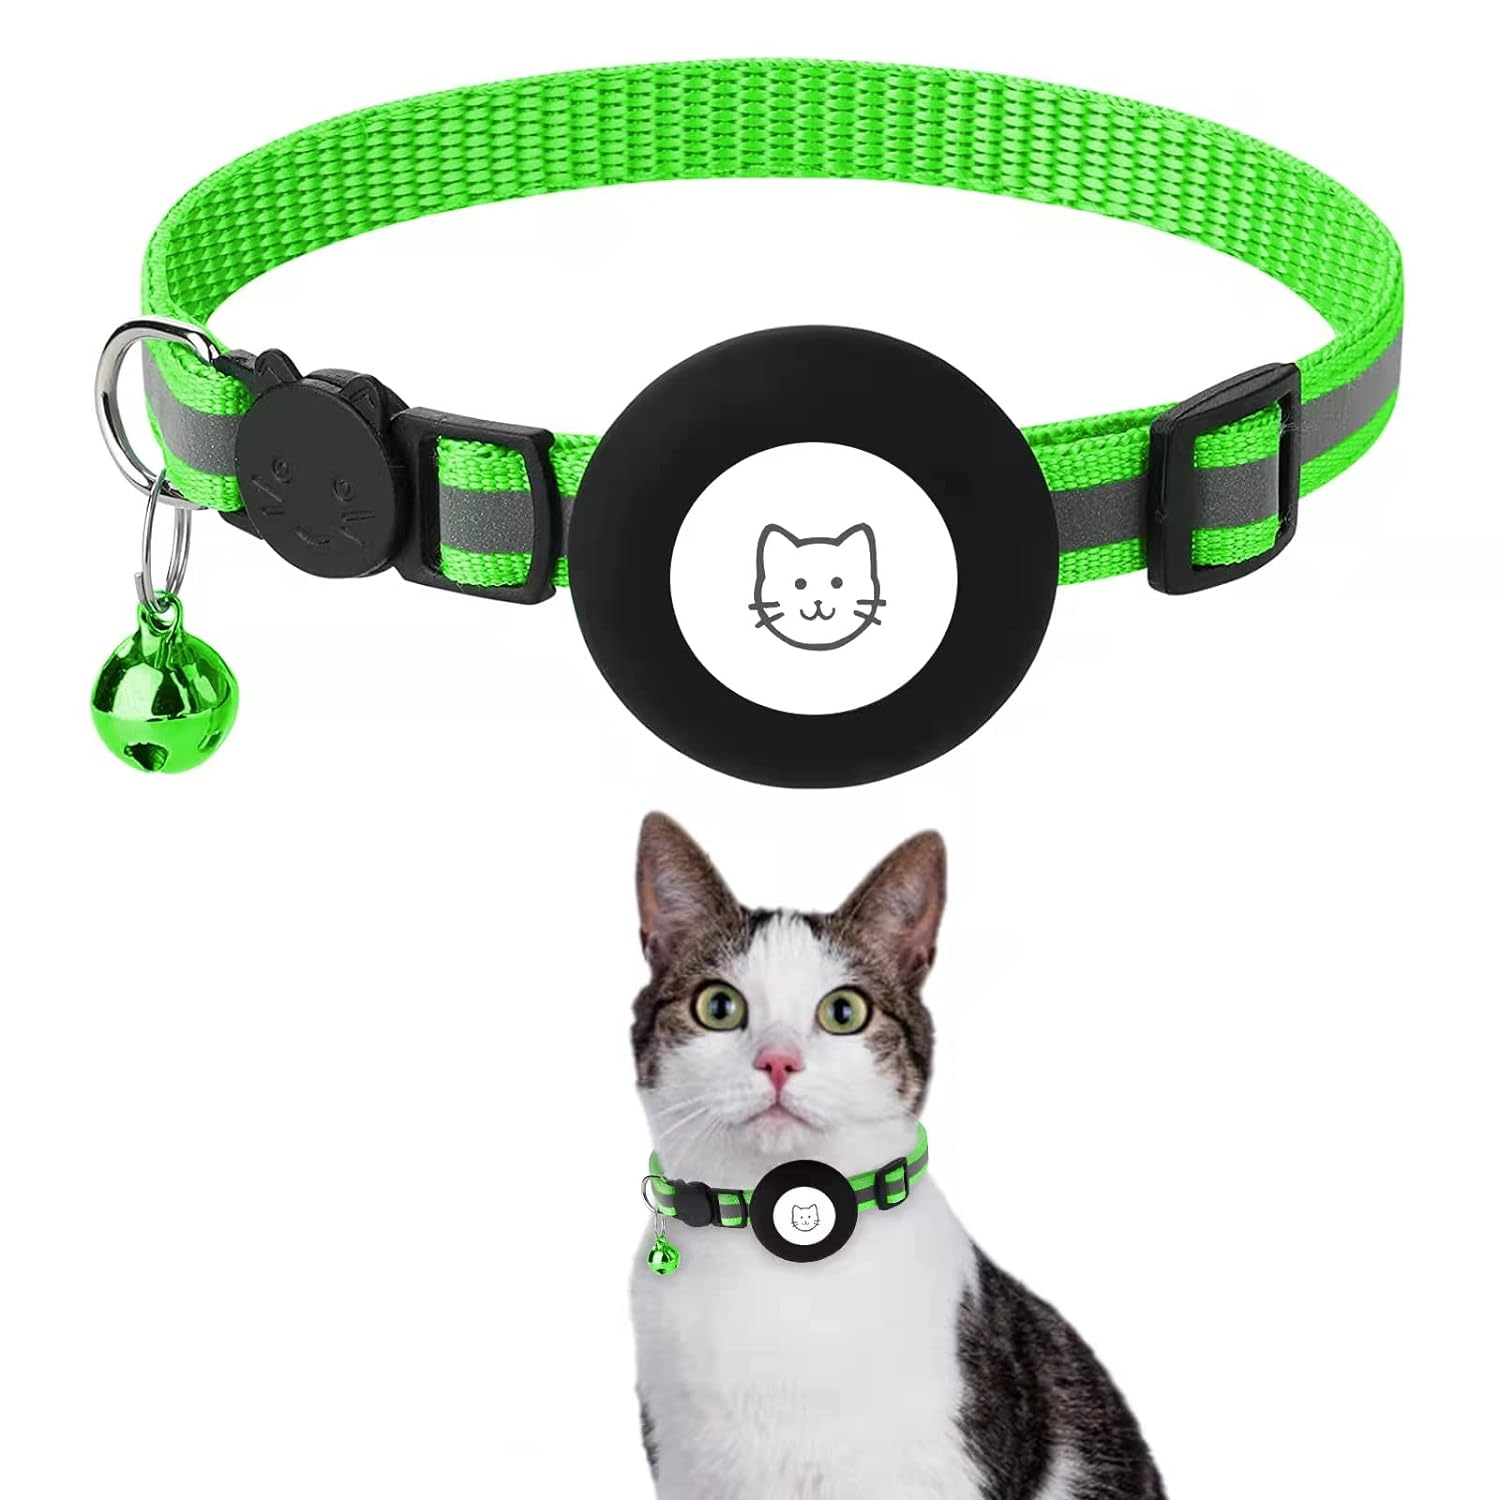 OUSHIBU Breakaway Airtag Cat Collar, Reflective Apple Air Tag Cat Collar with Bell and Waterproof Airtag Holder Case, GPS Pet Tracker Collar for Girl Boy Cats, Kittens, Puppies (Green)